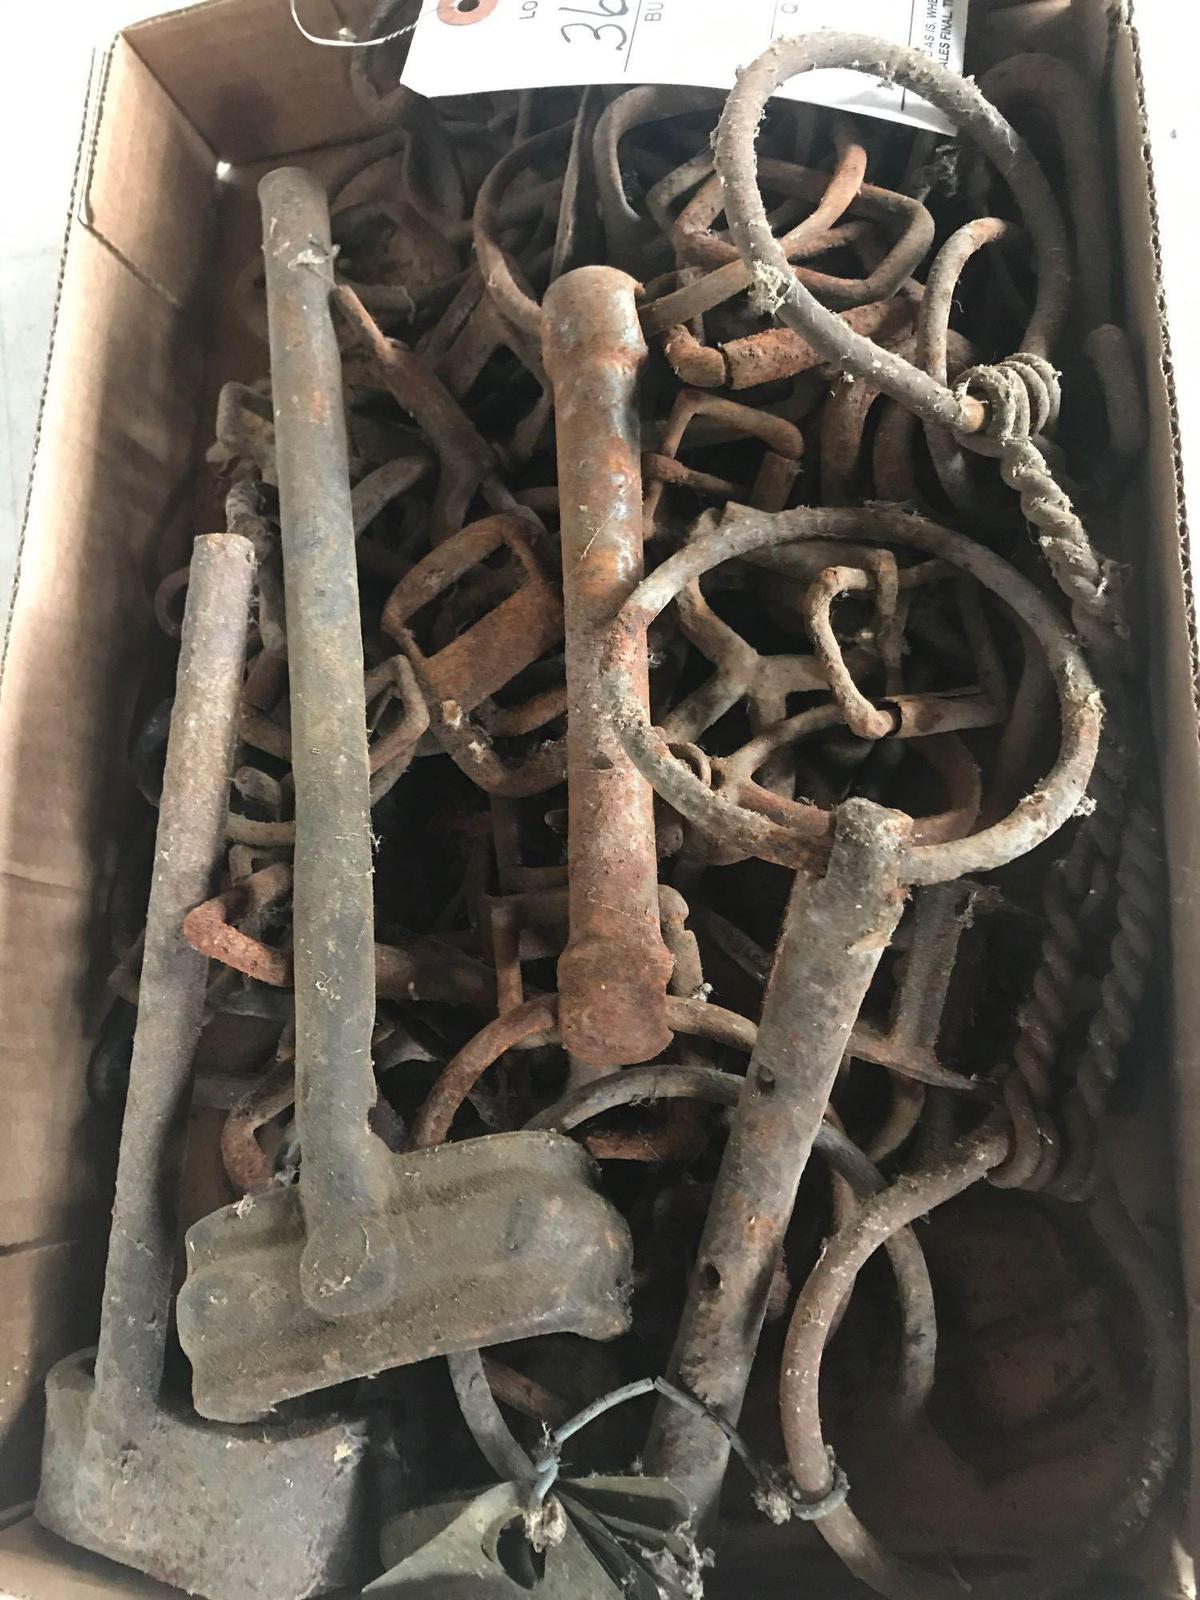 2 hub wrenches, horse bits, harness rings